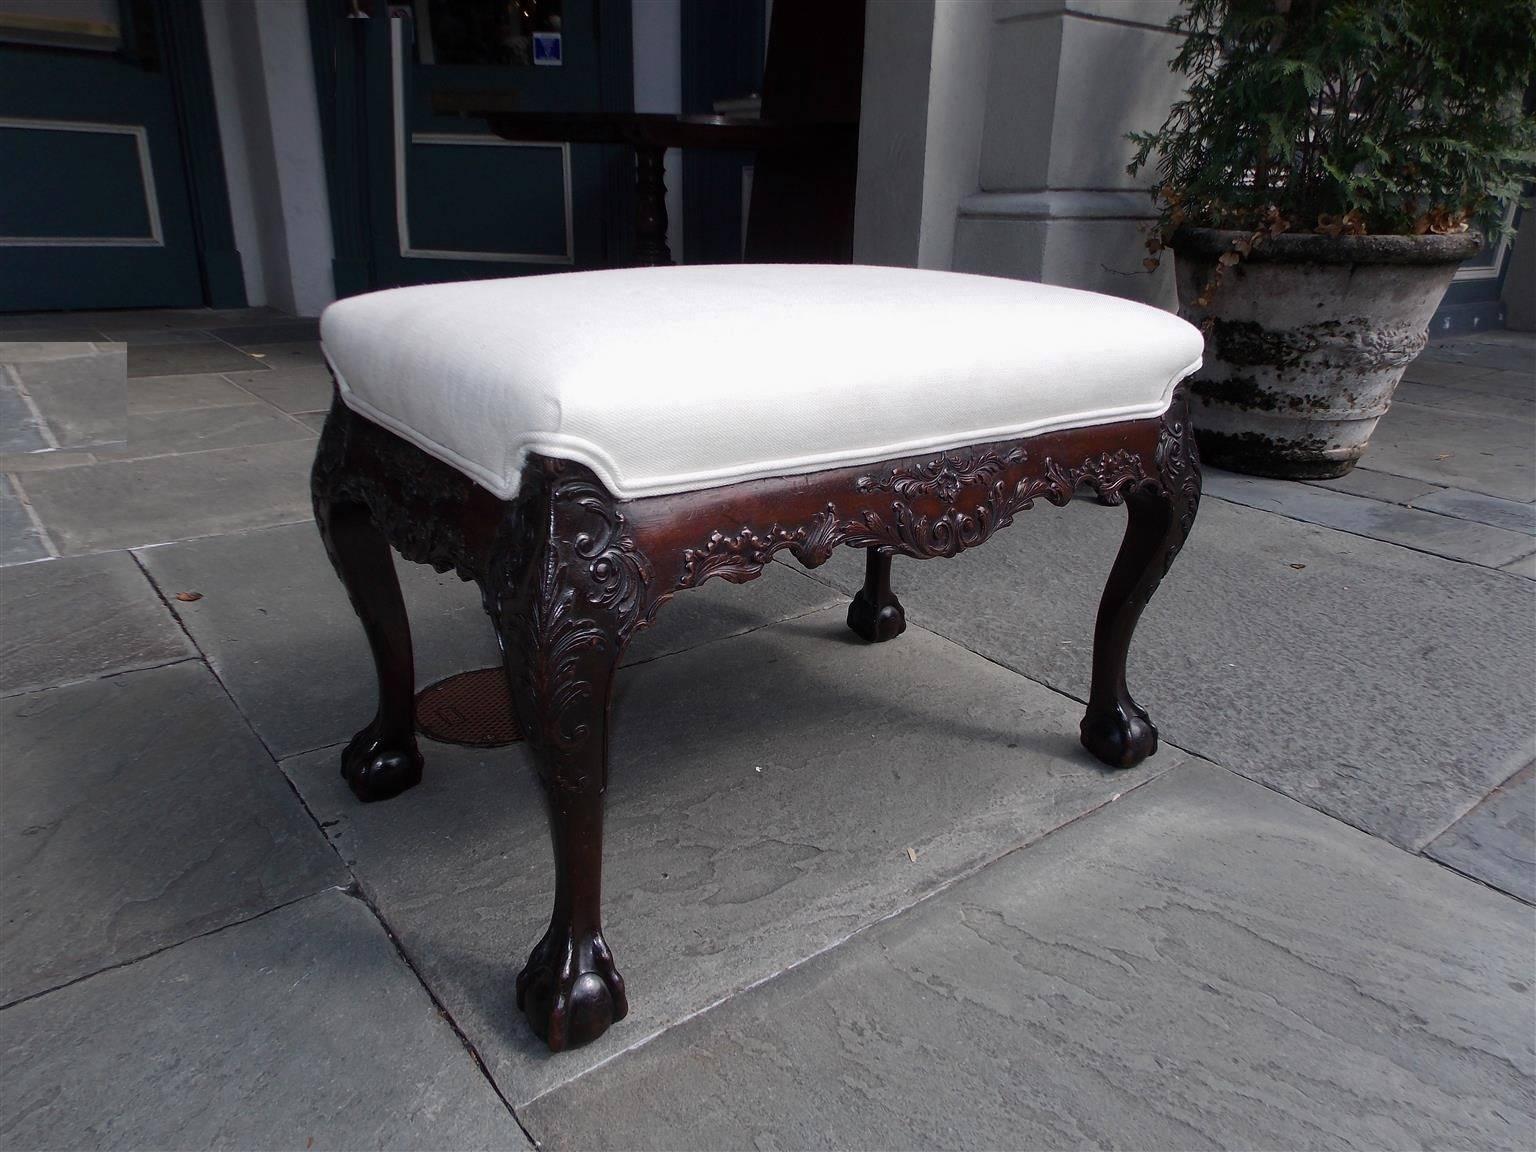 Irish Chippendale mahogany window bench with carved scalloped acanthus floral skirt, acanthus carved floral knees and terminating on tampered rounded legs with claw and ball feet. Bench is upholstered in white muslin with double piping, Late 18th